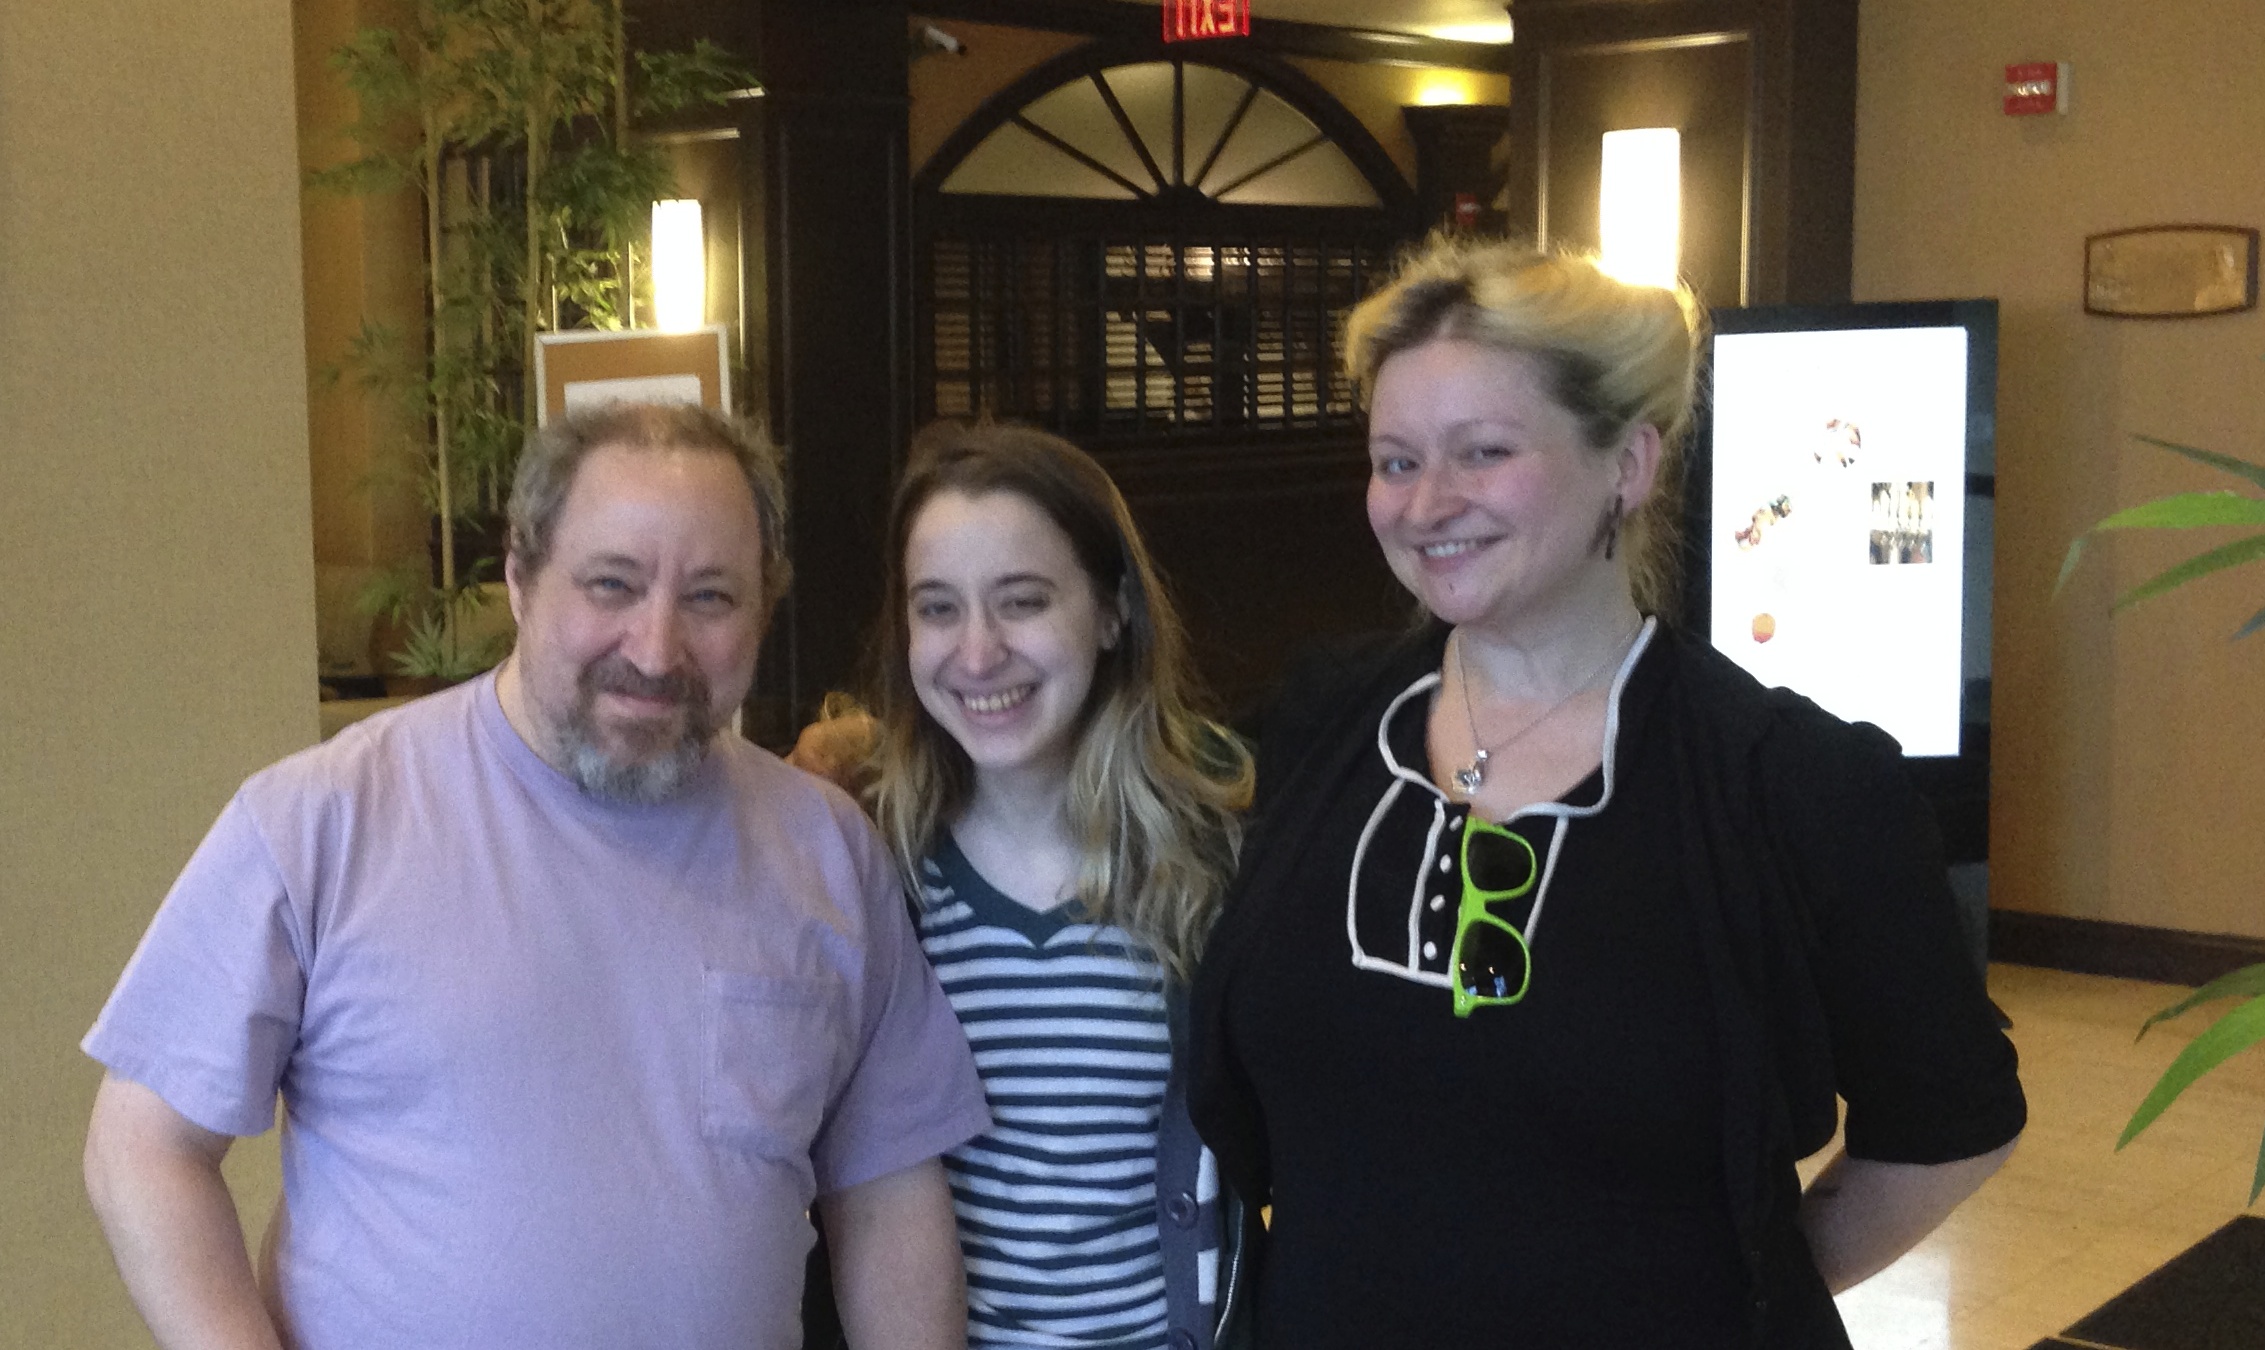  With Eliza Carthy (right) and Laura Ansill (center) after Eliza recorded her vocals for "If You Could Read My Mind" for the Cheese Project in a hotel room in Boston. May 2014. 